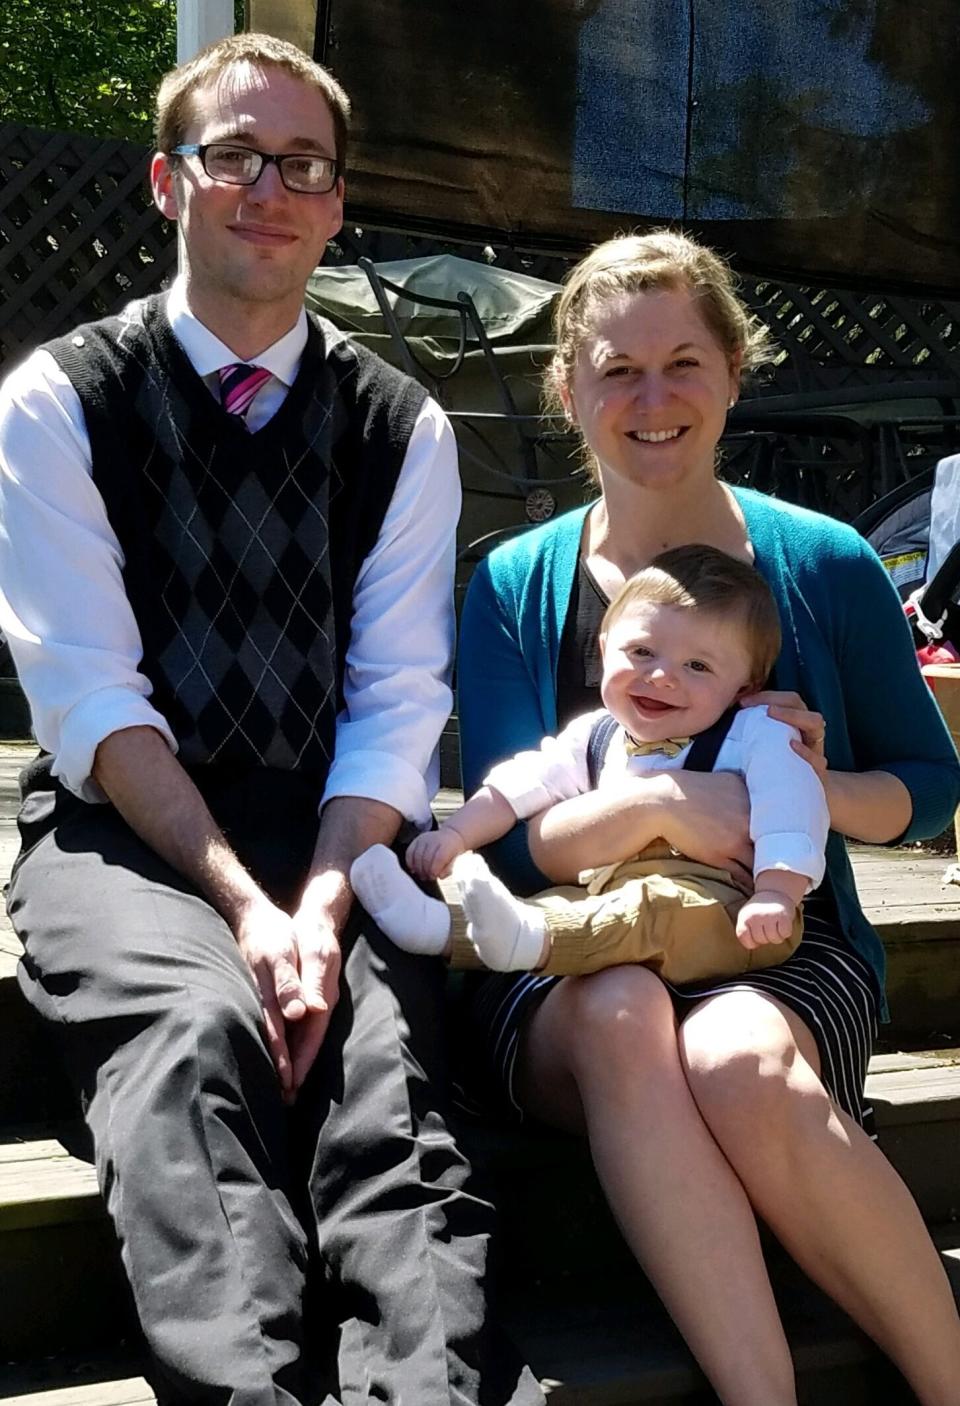 Andrew Evertts poses for a family photo with his wife, Susan, and his son, Jackson. (Credit: Andrew Evertts)